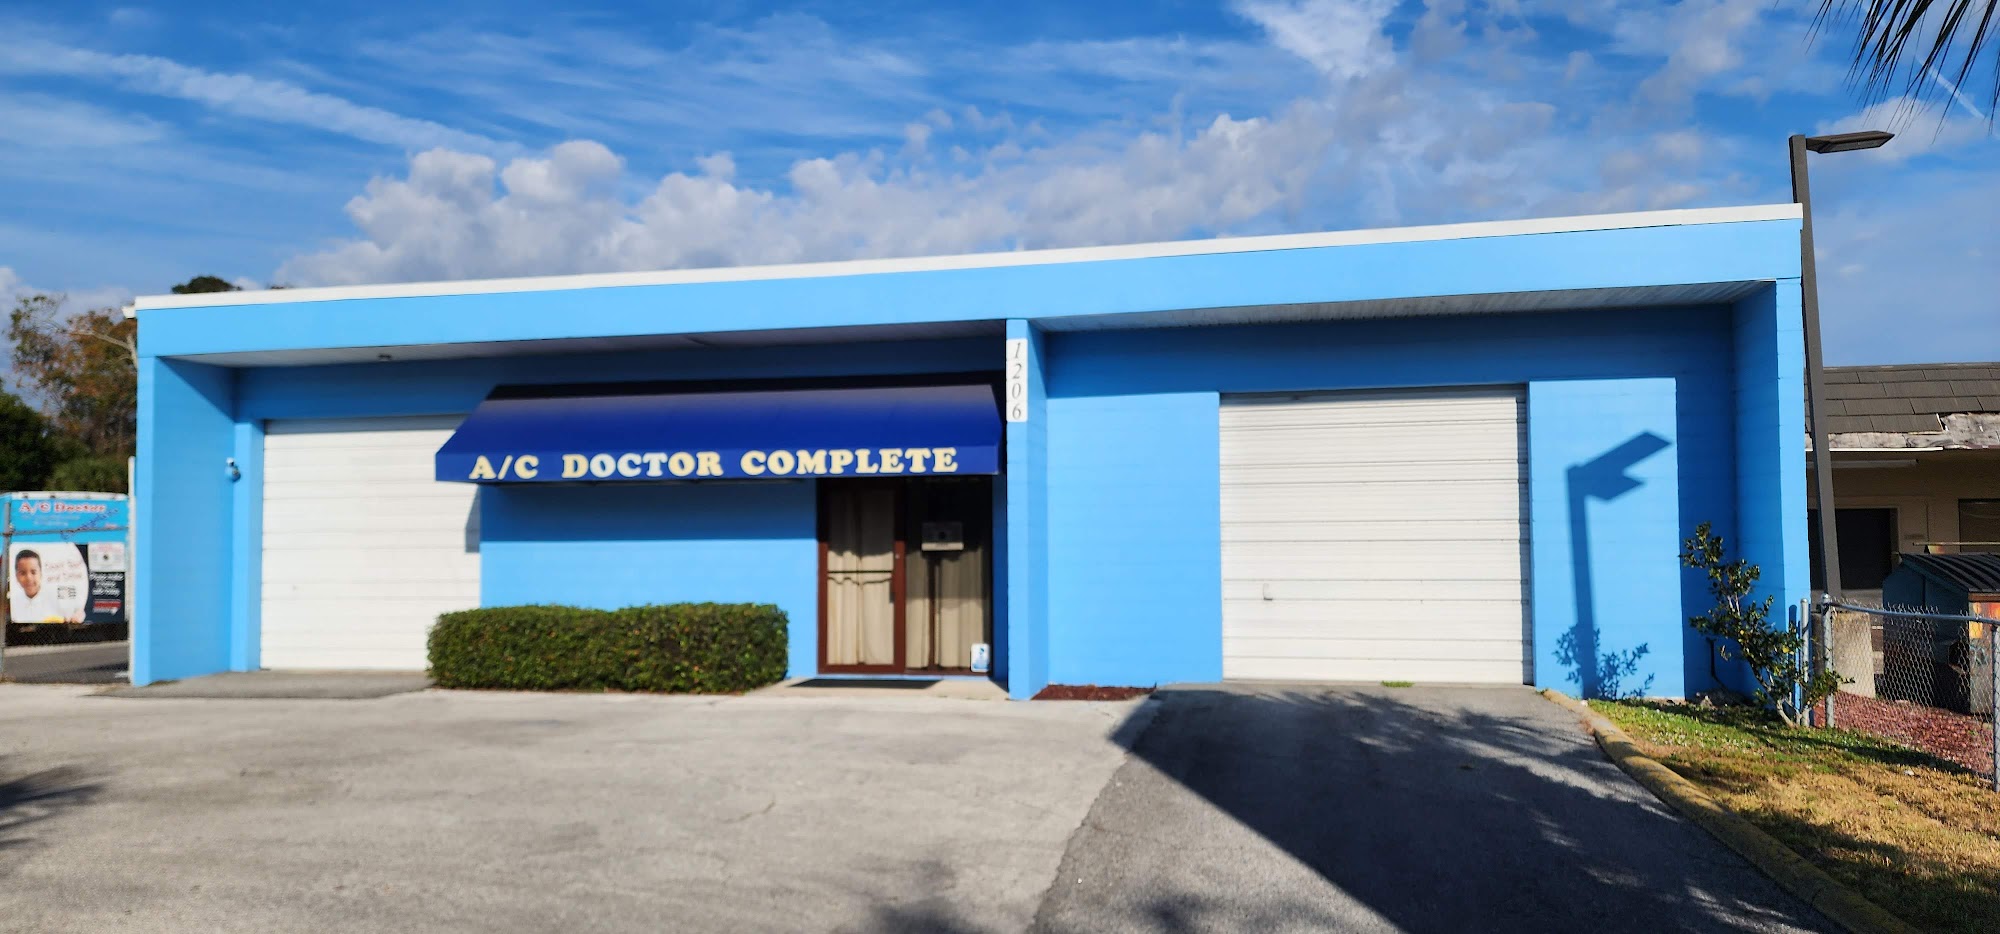 A/C Doctor Complete Inc.